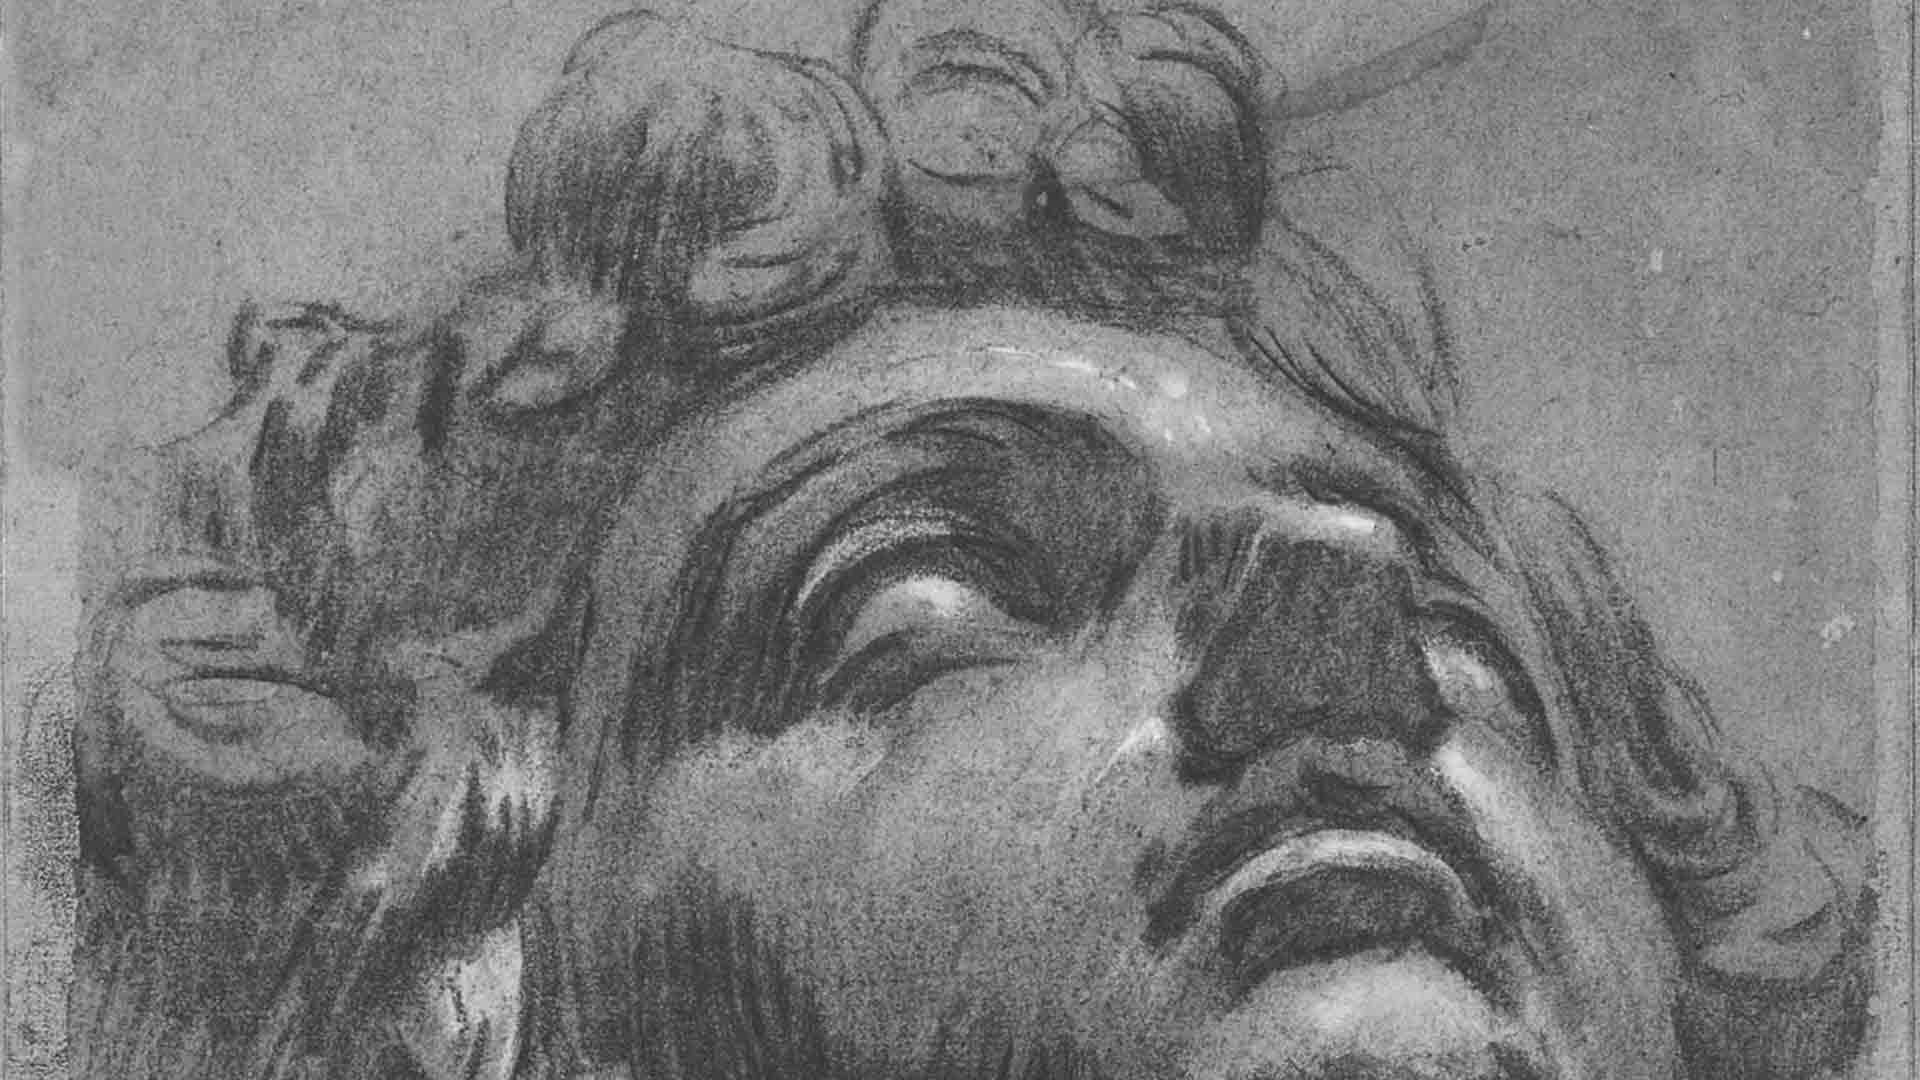 Drawing detail of Head of Giuliano de' Medici, by Tintoretto, 1540's at https://artsandculture.google.com/asset/head-of-giuliano-de-medici-jacopo-tintoretto/9QGqt4_mkjE5NQ